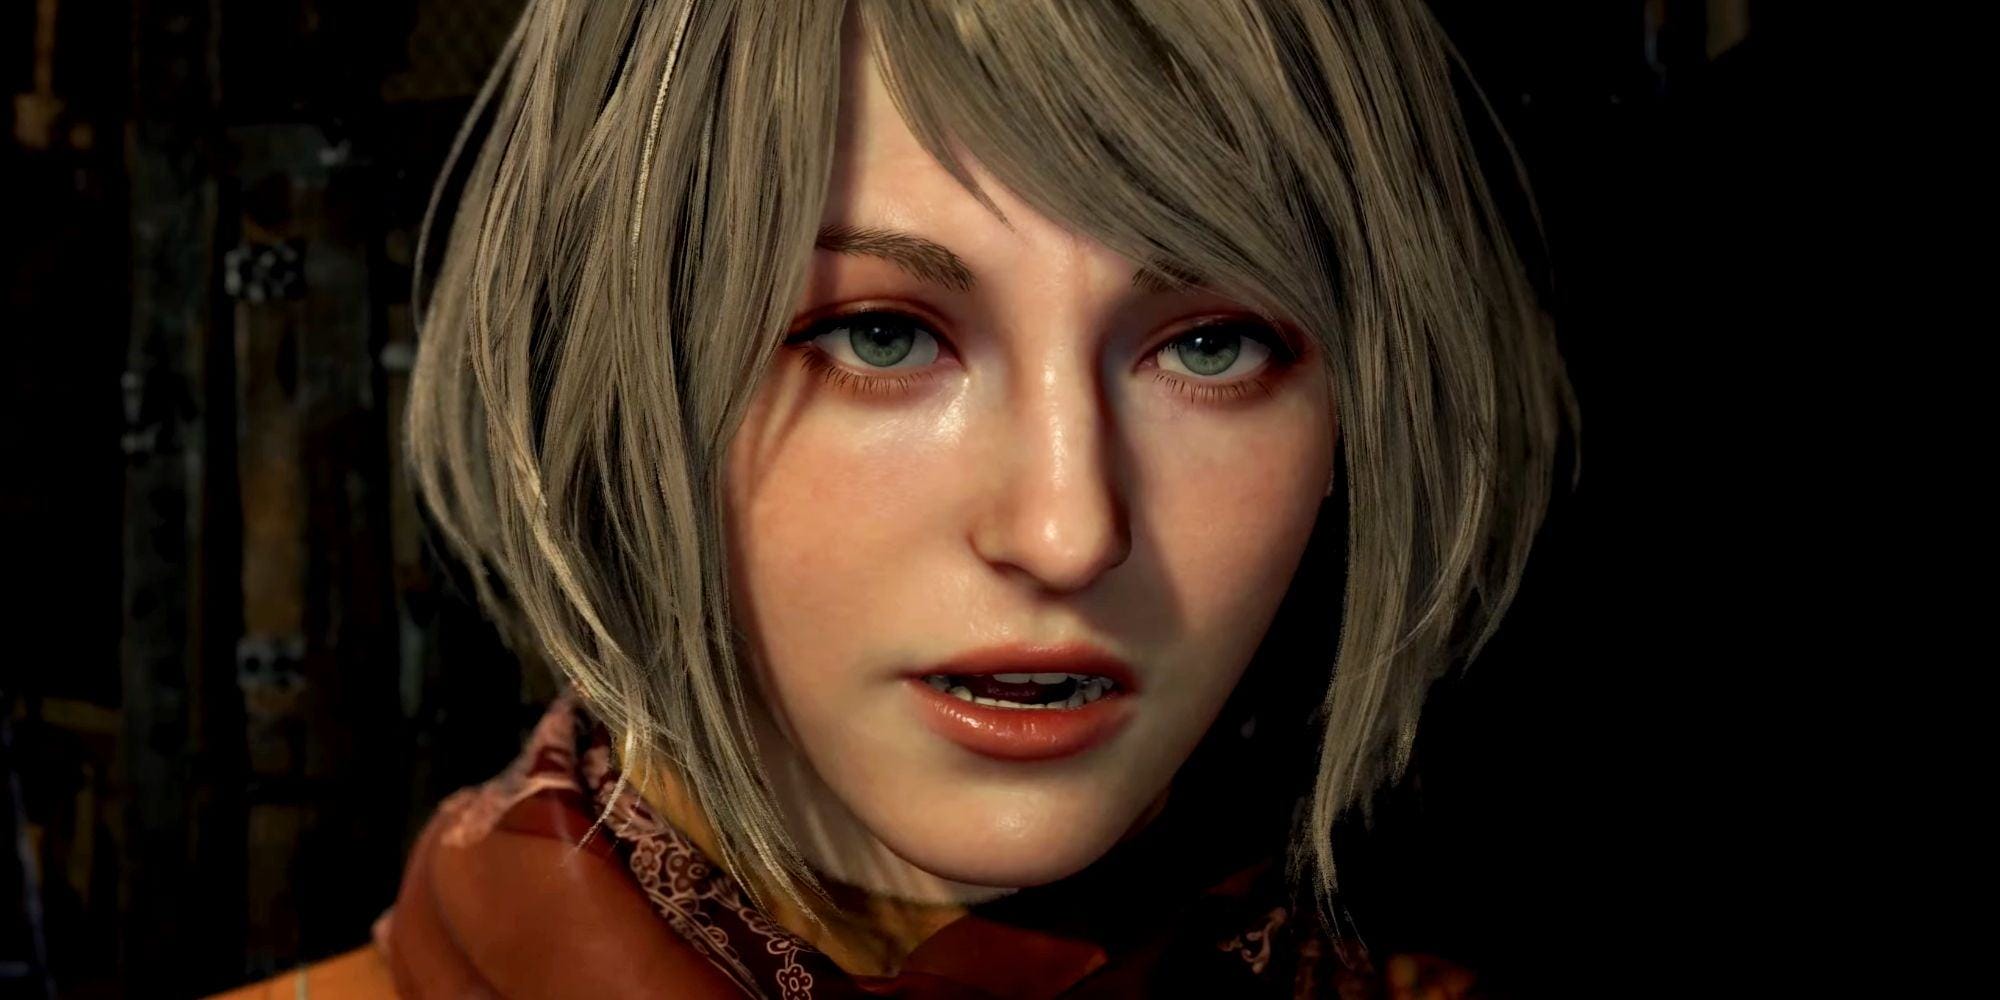 A close-up of Ashely during a cutscene in the Resident Evil 4 remake.